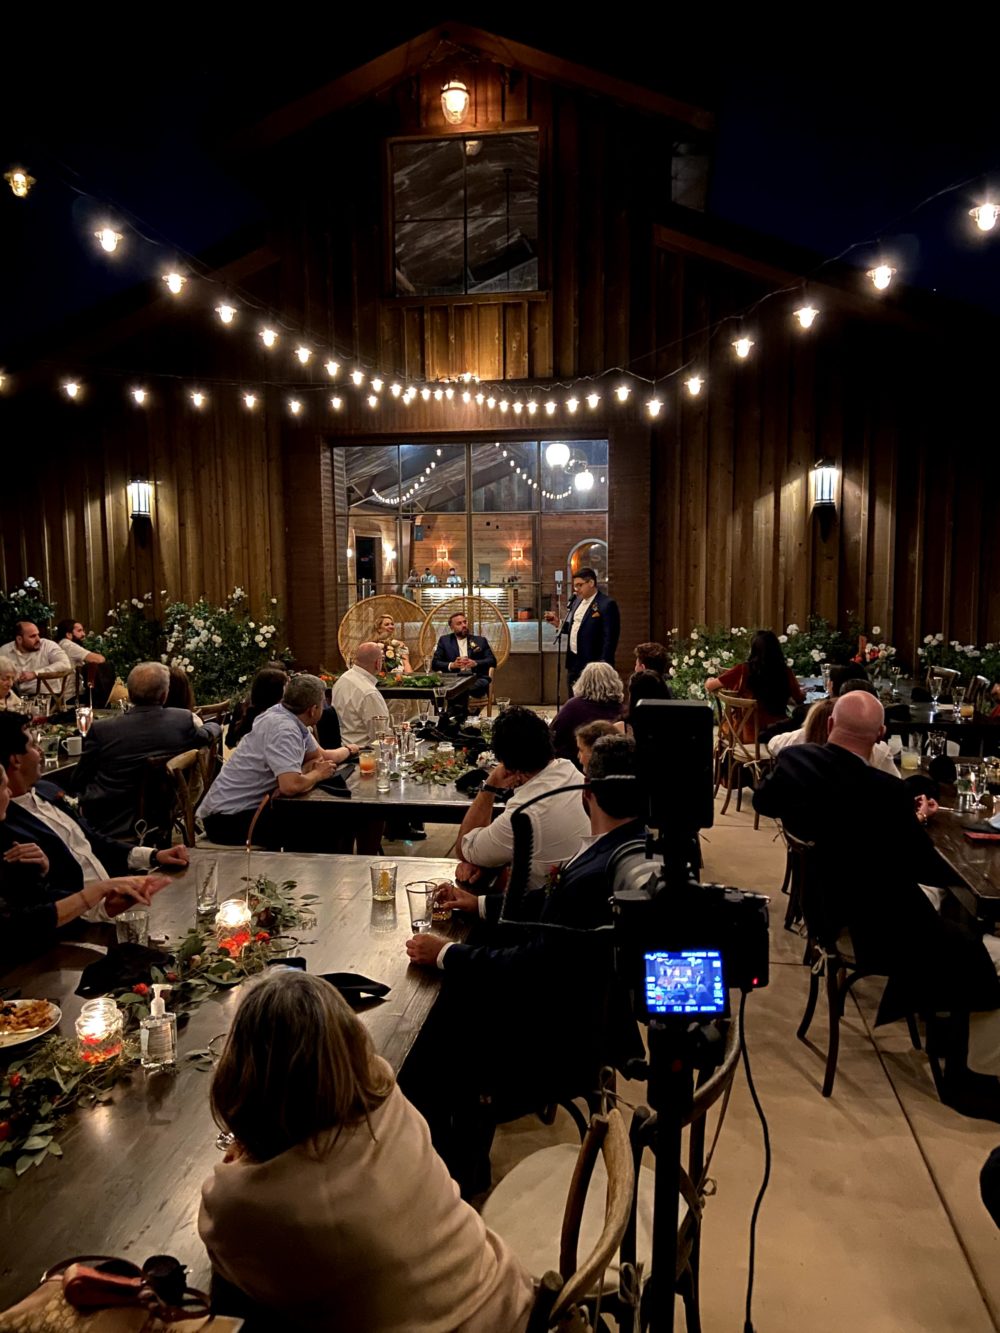 Evening outdoors at dining tables as guests watch best man giving toast to bride and groom sitting at main table in front of modern barn. 